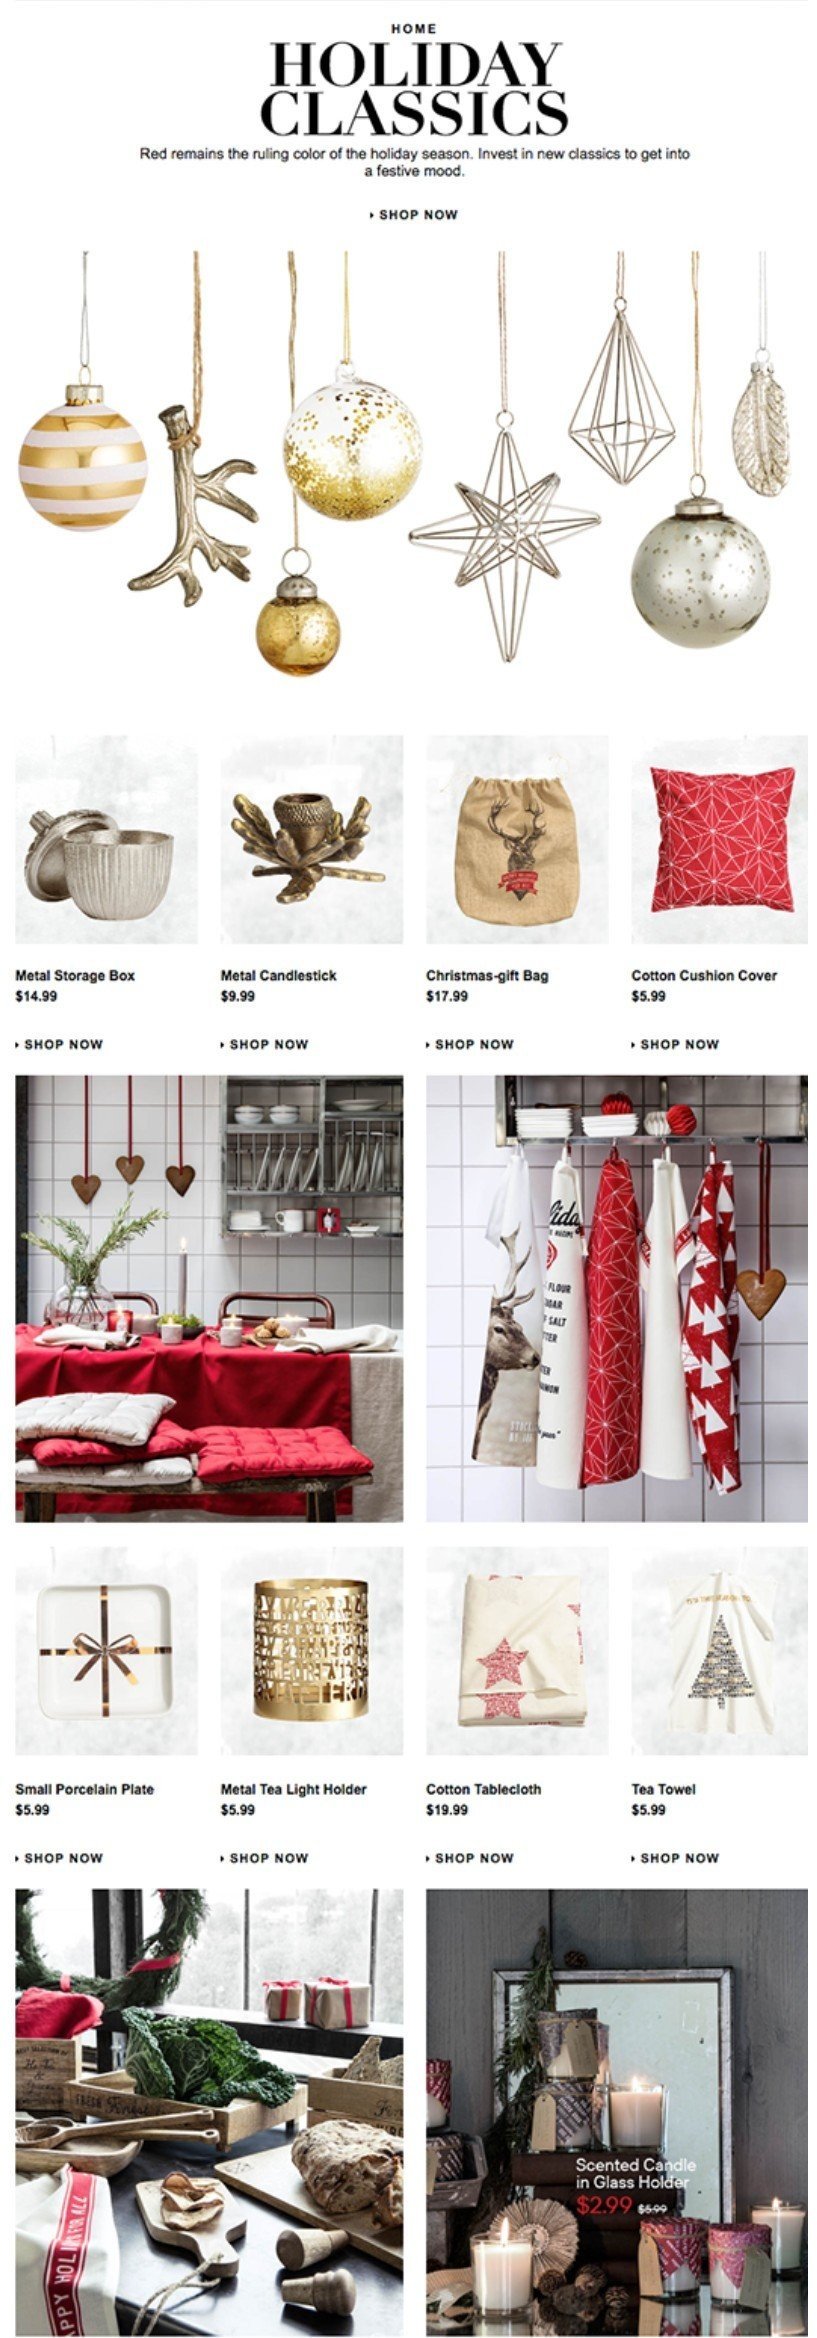 Stylish Christmas Newsletter Idea for a Holiday at Home